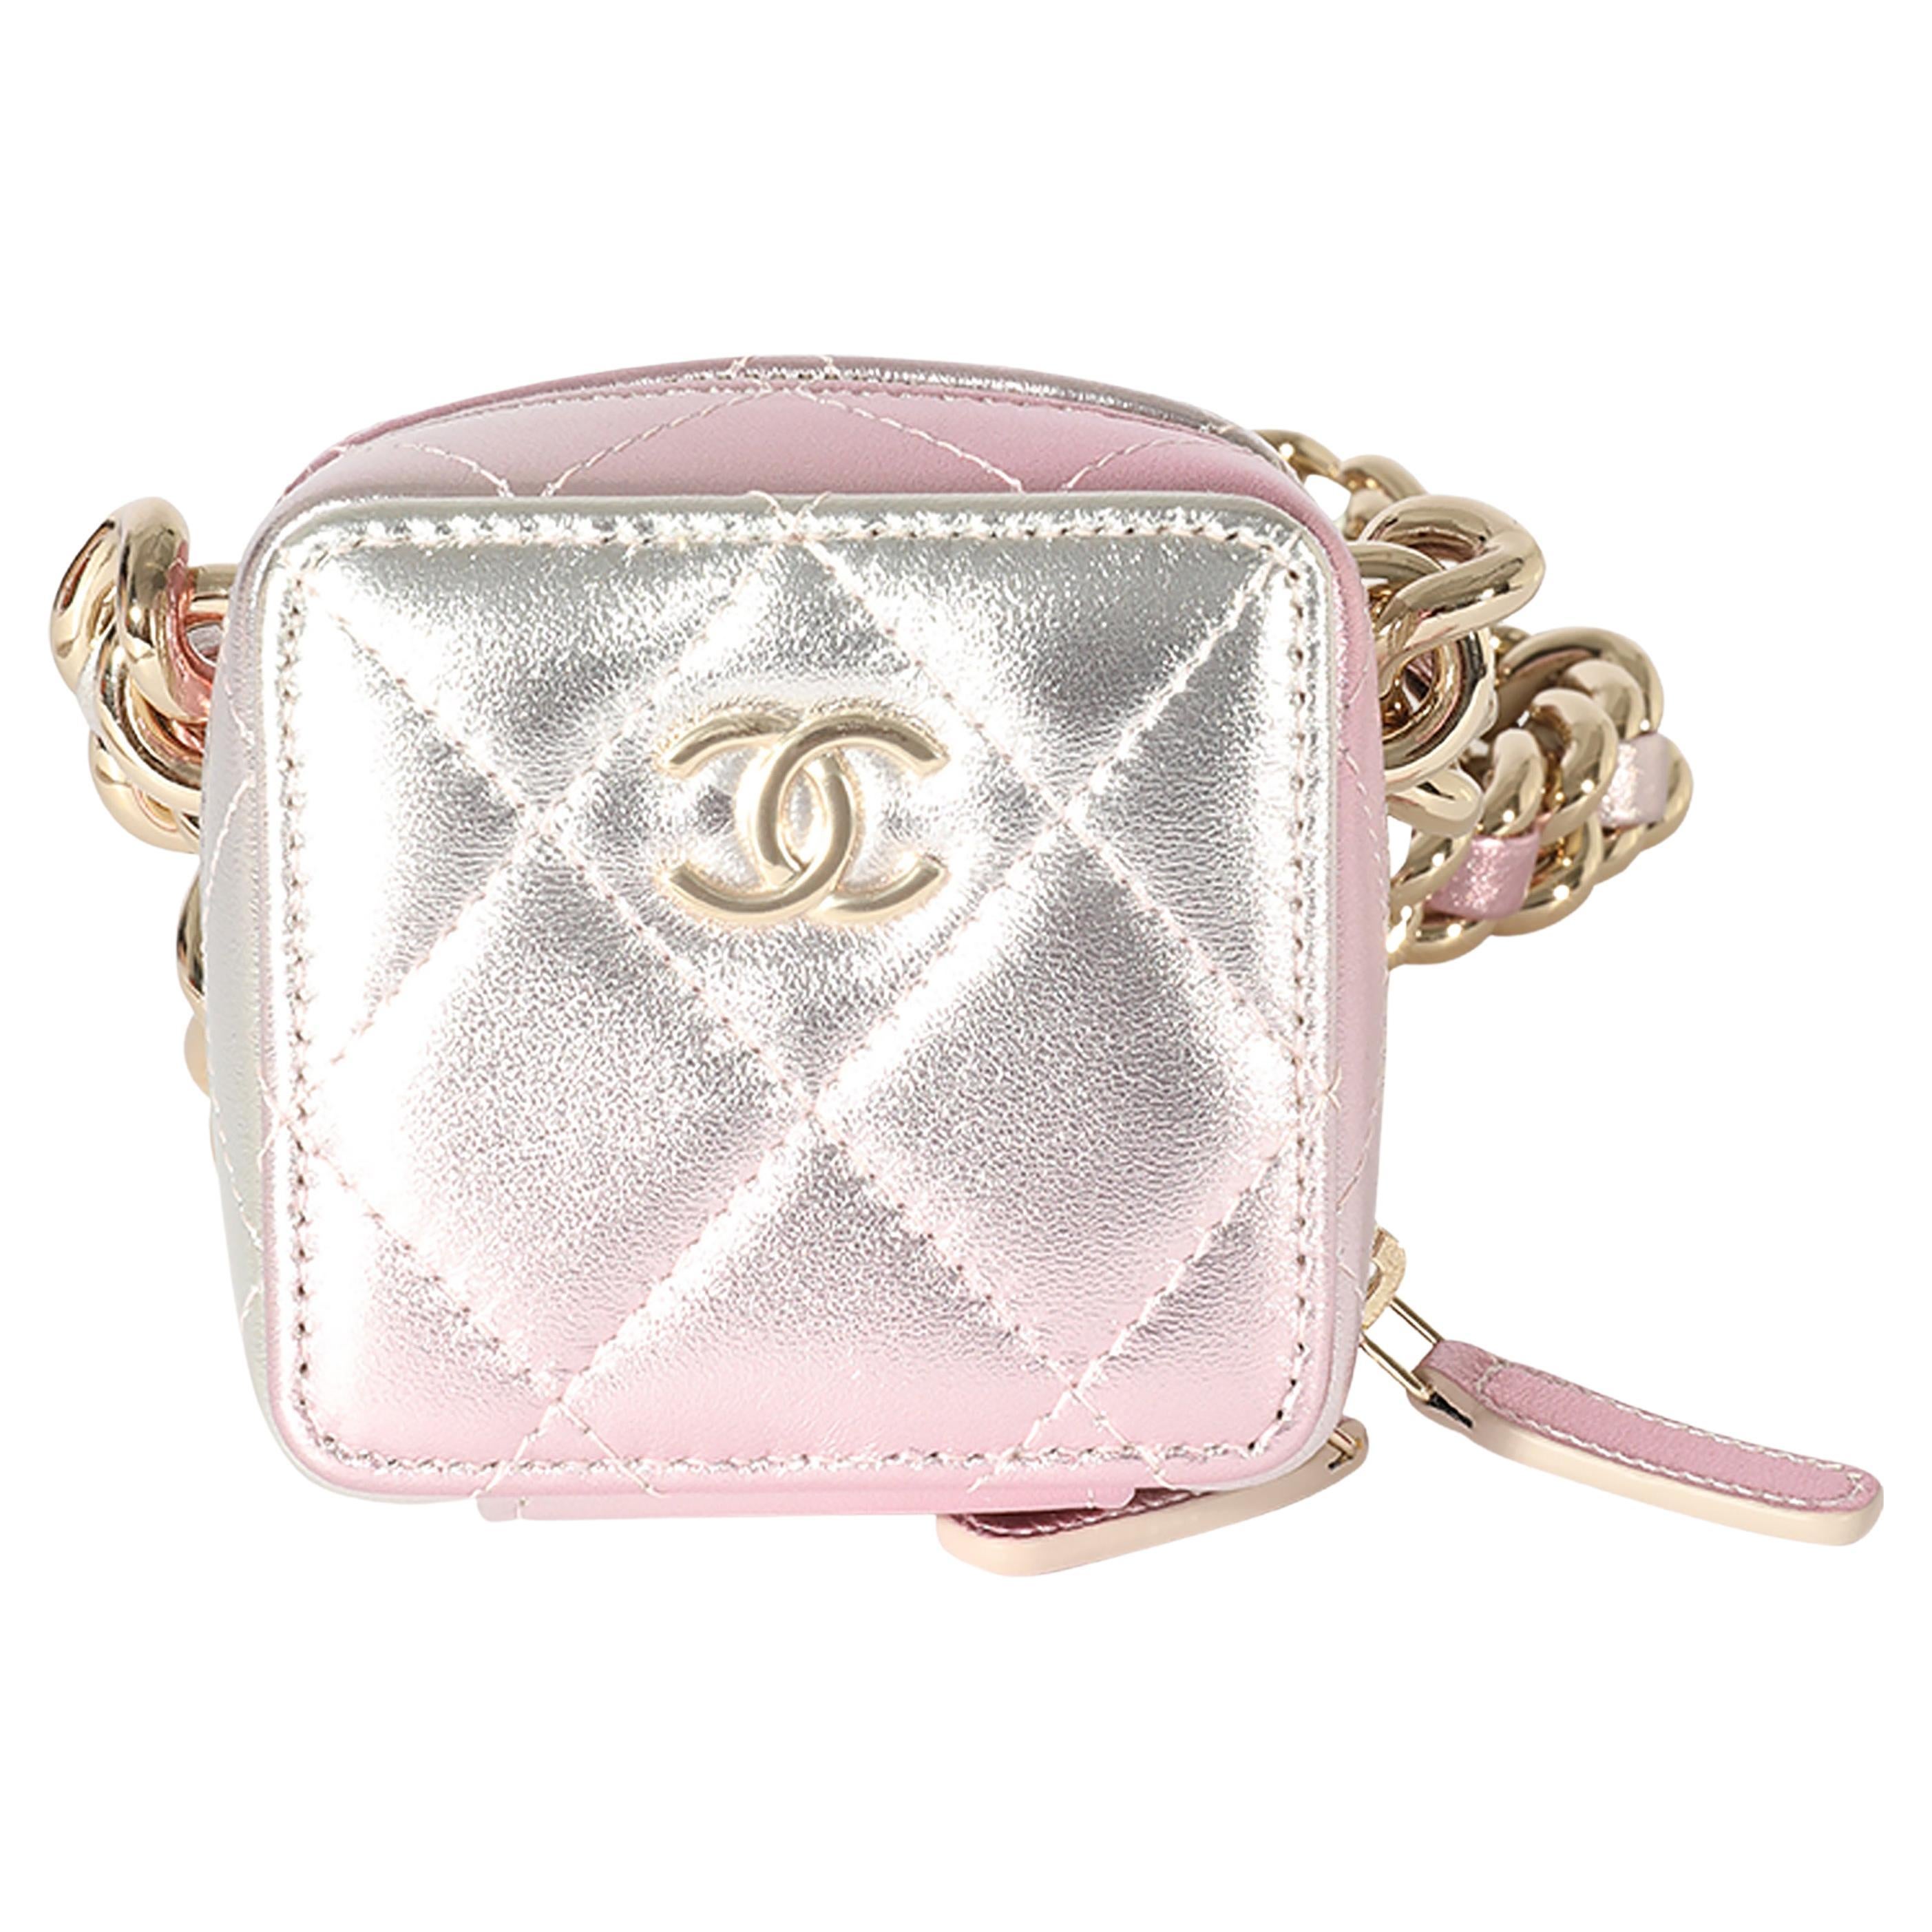 Chanel Metallic Lambskin Quilted Coco Punk Clutch with Chain